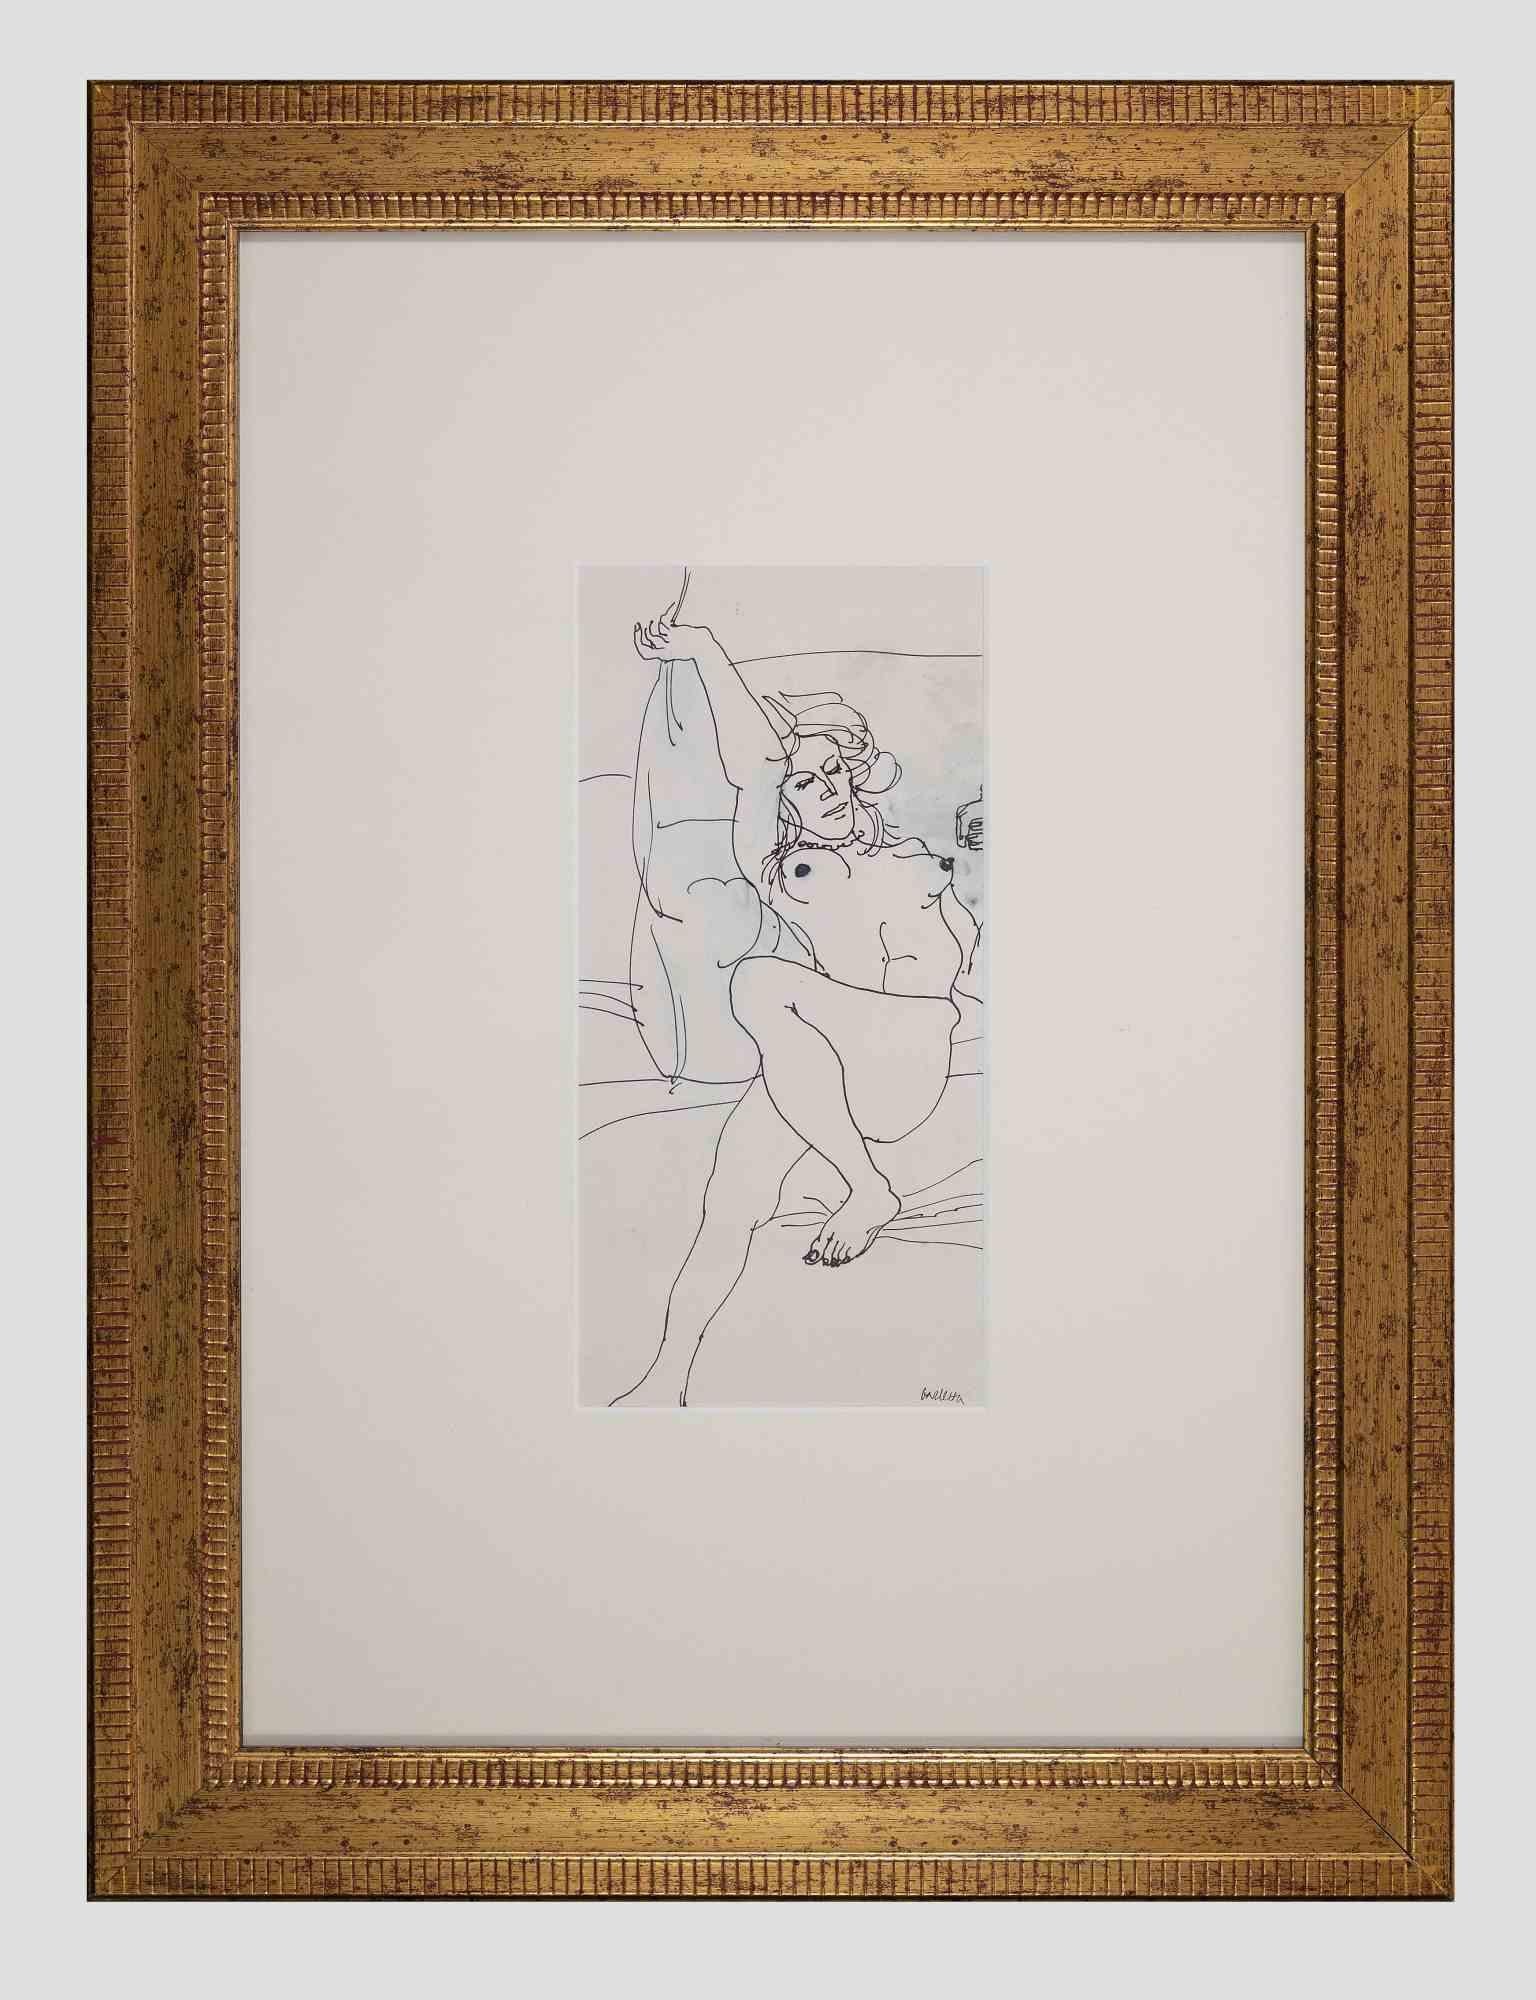 Nude of Woman is an original artwork realized by Sergio Barletta in the 1970s.

Pen ink drawing on paper. Includes a beautiful gilded frame.

Hand signed on the lower margin.